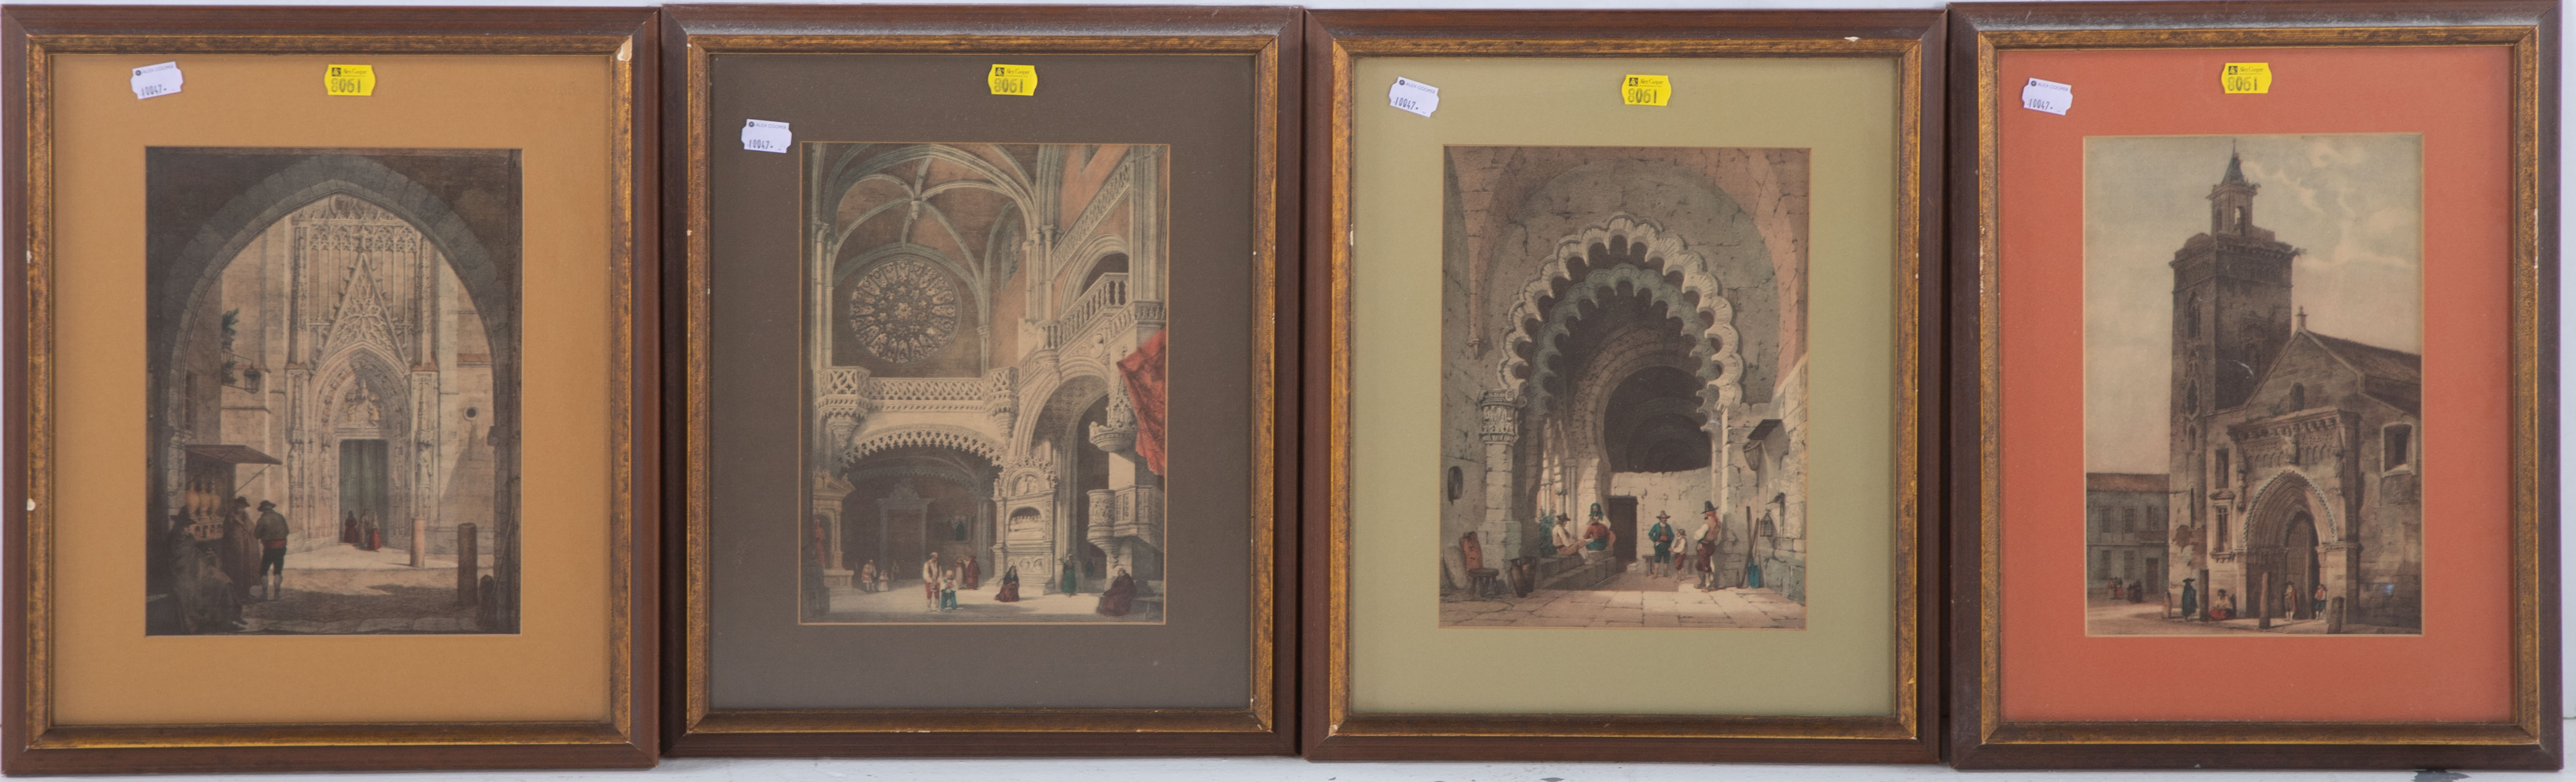 FOUR FRAMED PRINTS OF SPANISH ARCHITECTURE 333c15